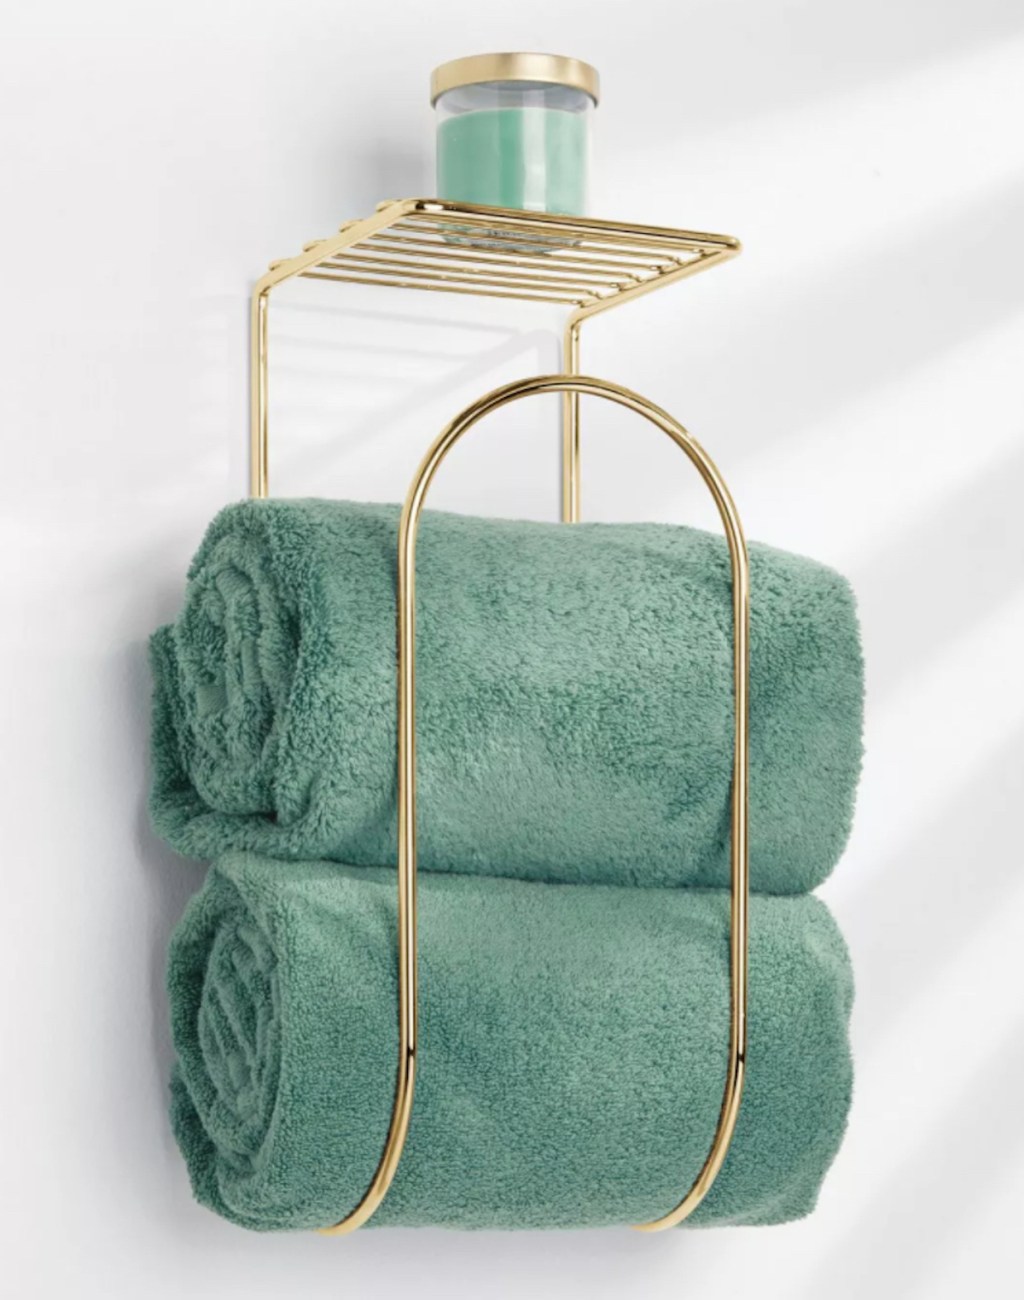 gold metal towel rack with teal towels and candle on shelf hanging on wall